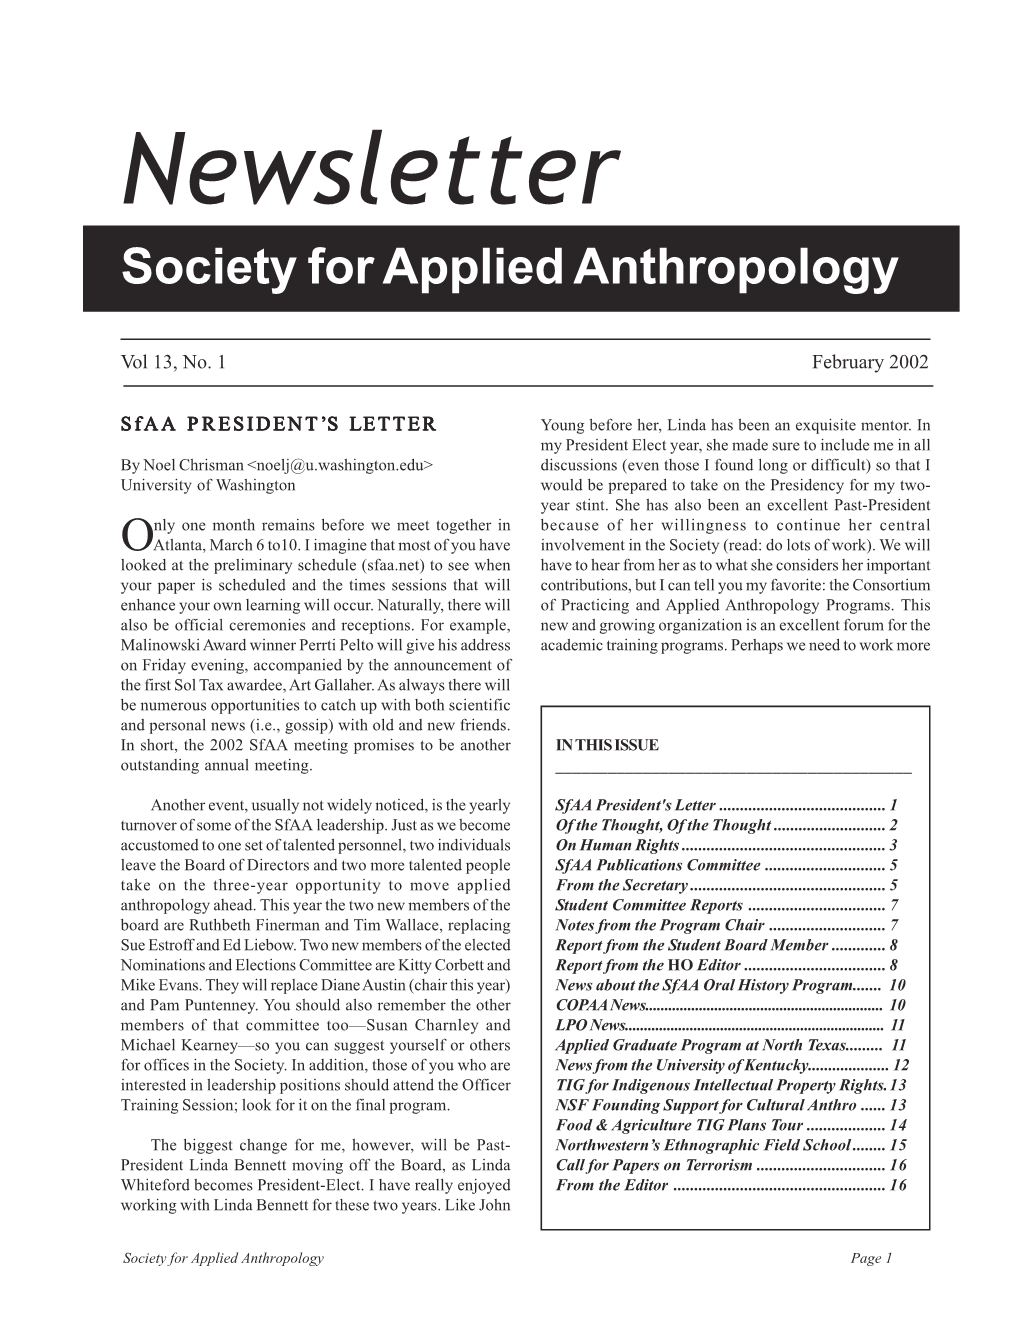 Newsletter Society for Applied Anthropology